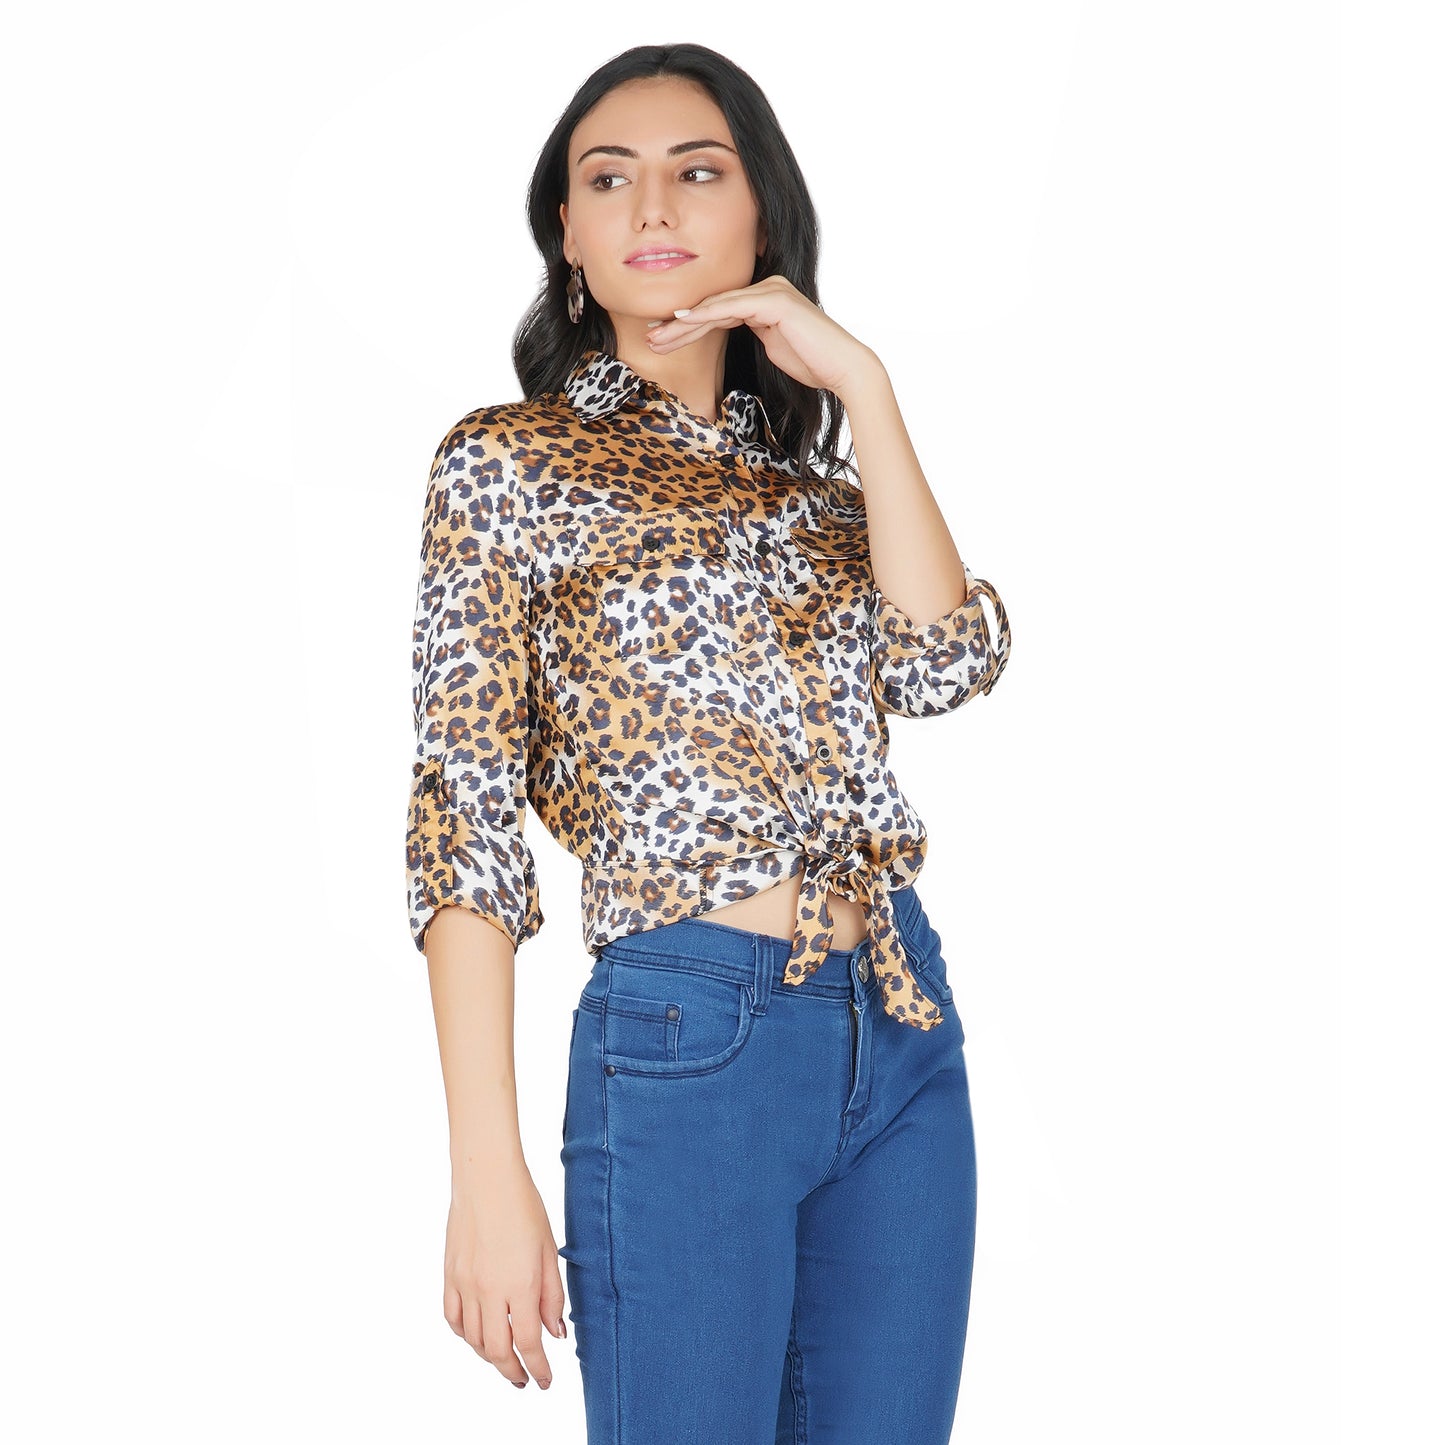 SLAY. Women's Animal Print Shirt with Front Tie Knot & Roll Up Sleeves-clothing-to-slay.myshopify.com-Leopard Print Shirt